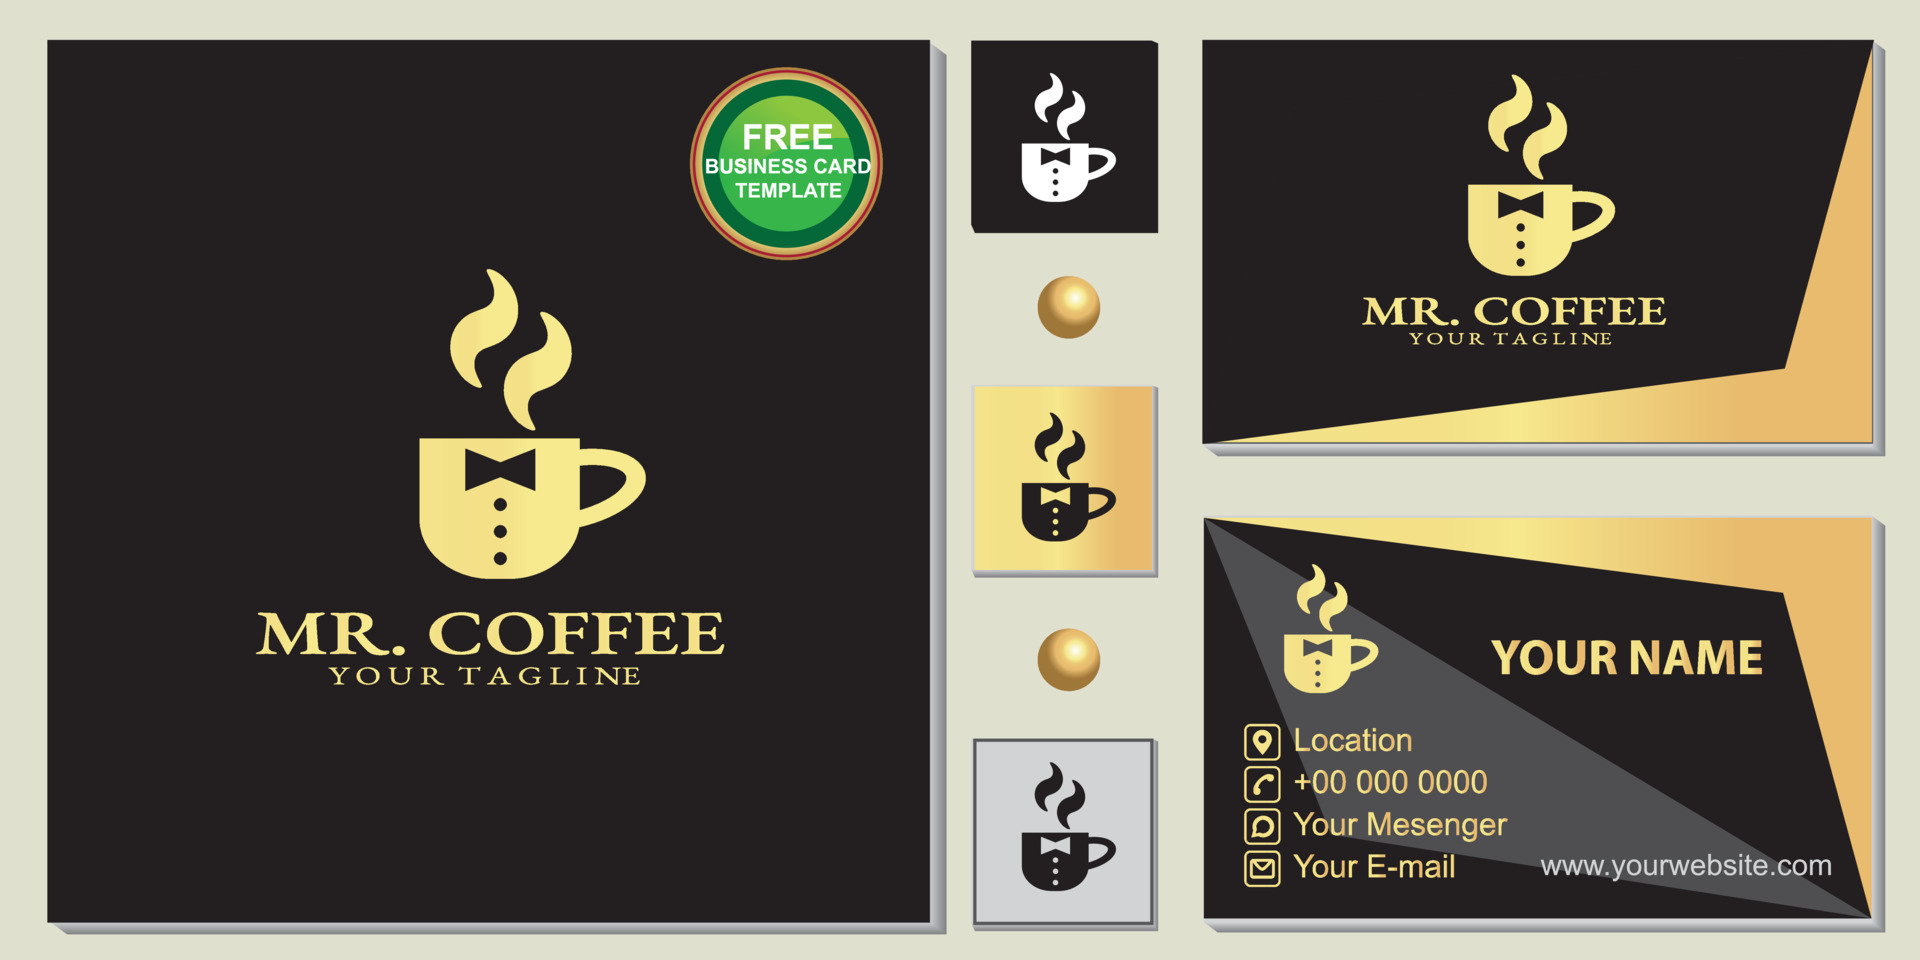 https://static.vecteezy.com/system/resources/previews/005/196/352/original/luxury-gold-mister-coffee-shop-logo-simple-black-free-premium-business-card-template-eps-10-vector.jpg